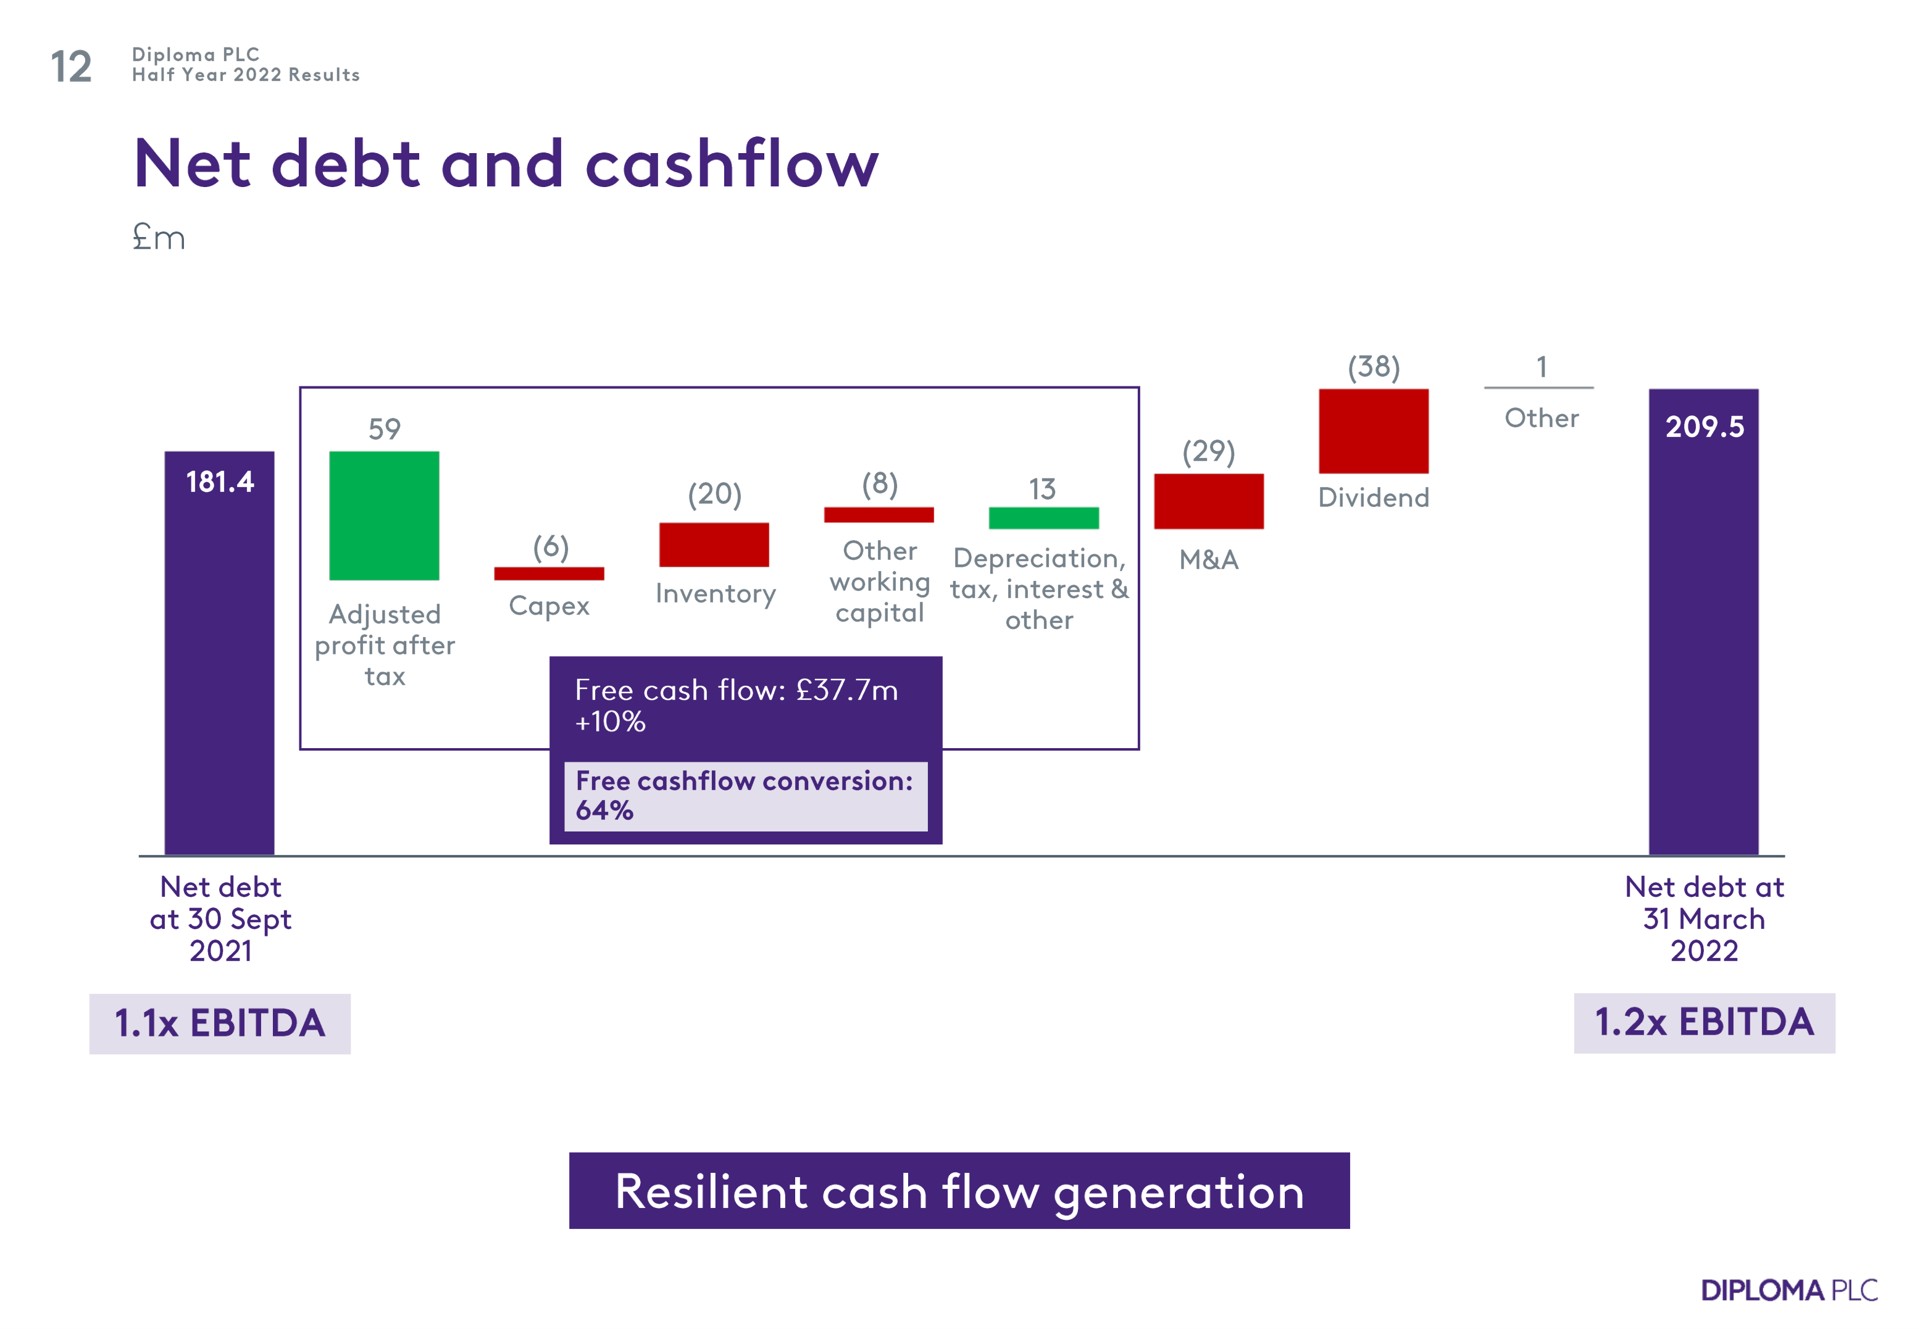 net debt and resilient cash flow generation | Diploma